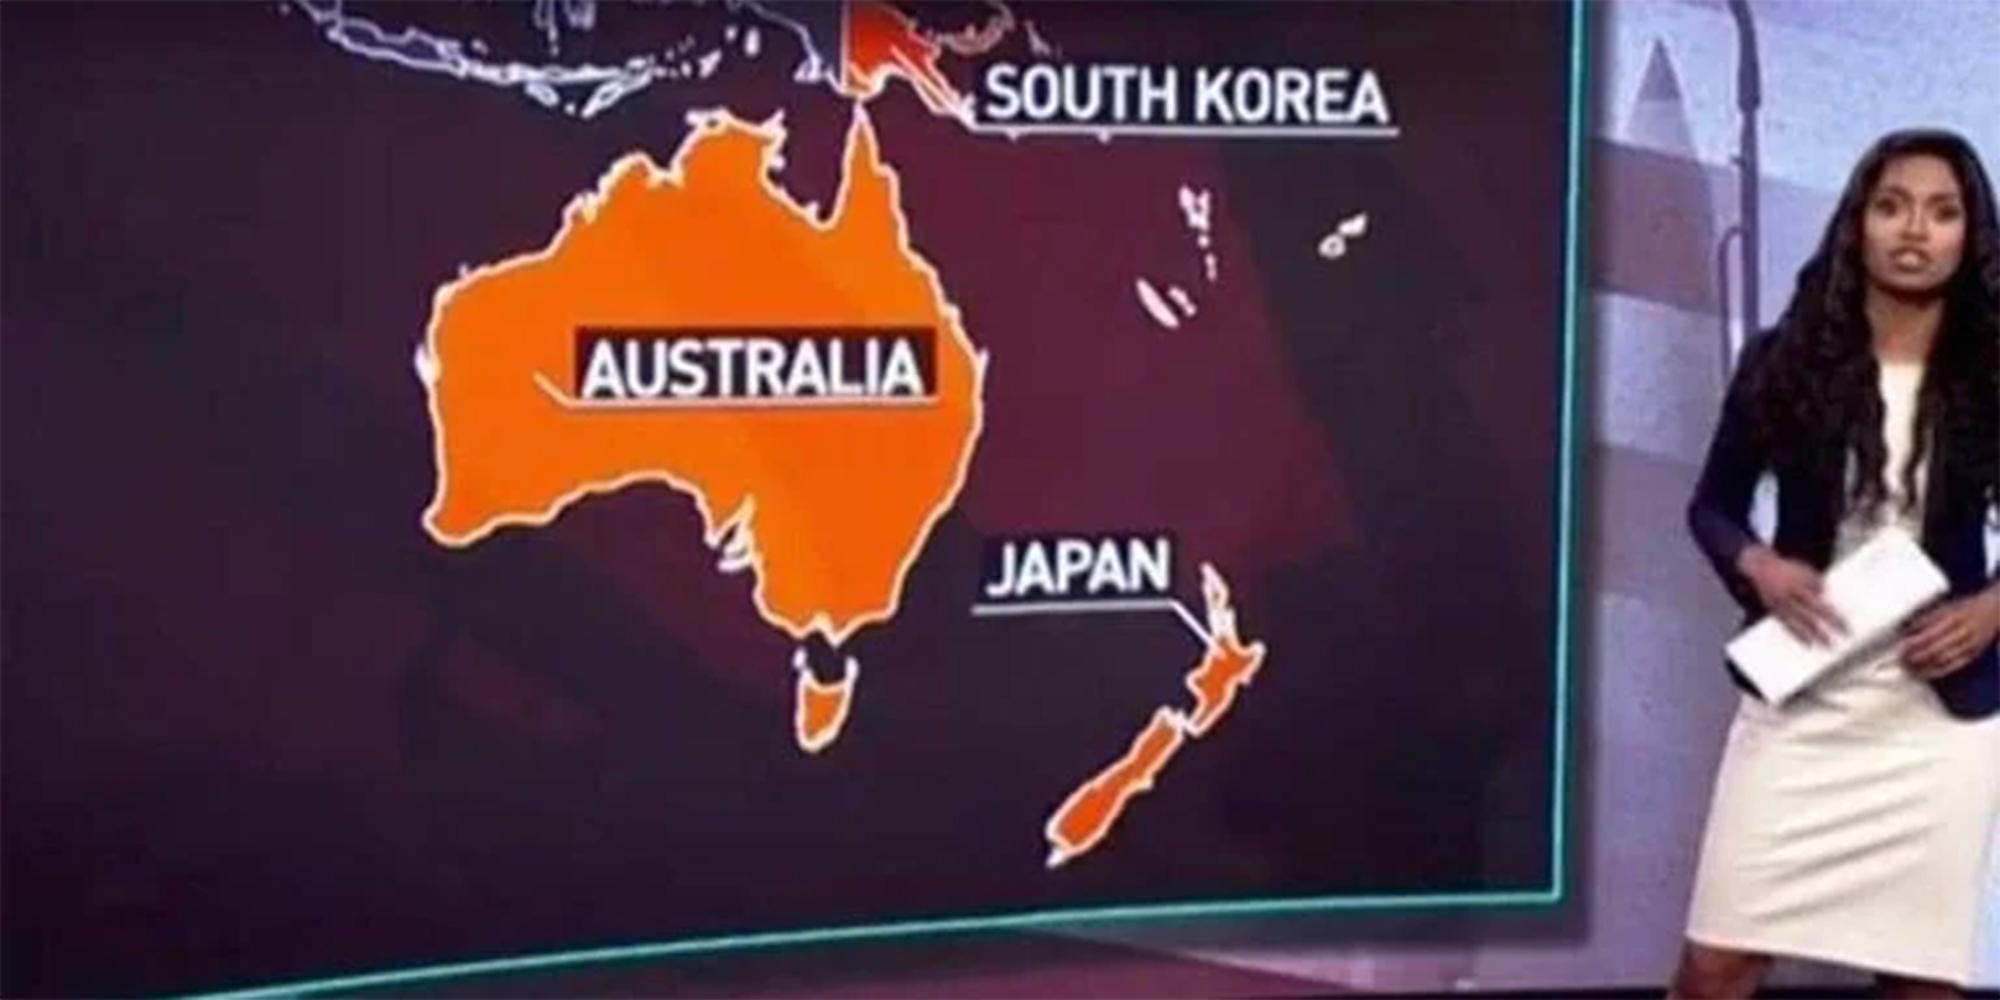 Russian news got New Zealand and Japan confused on a map | indy1002000 x 1000